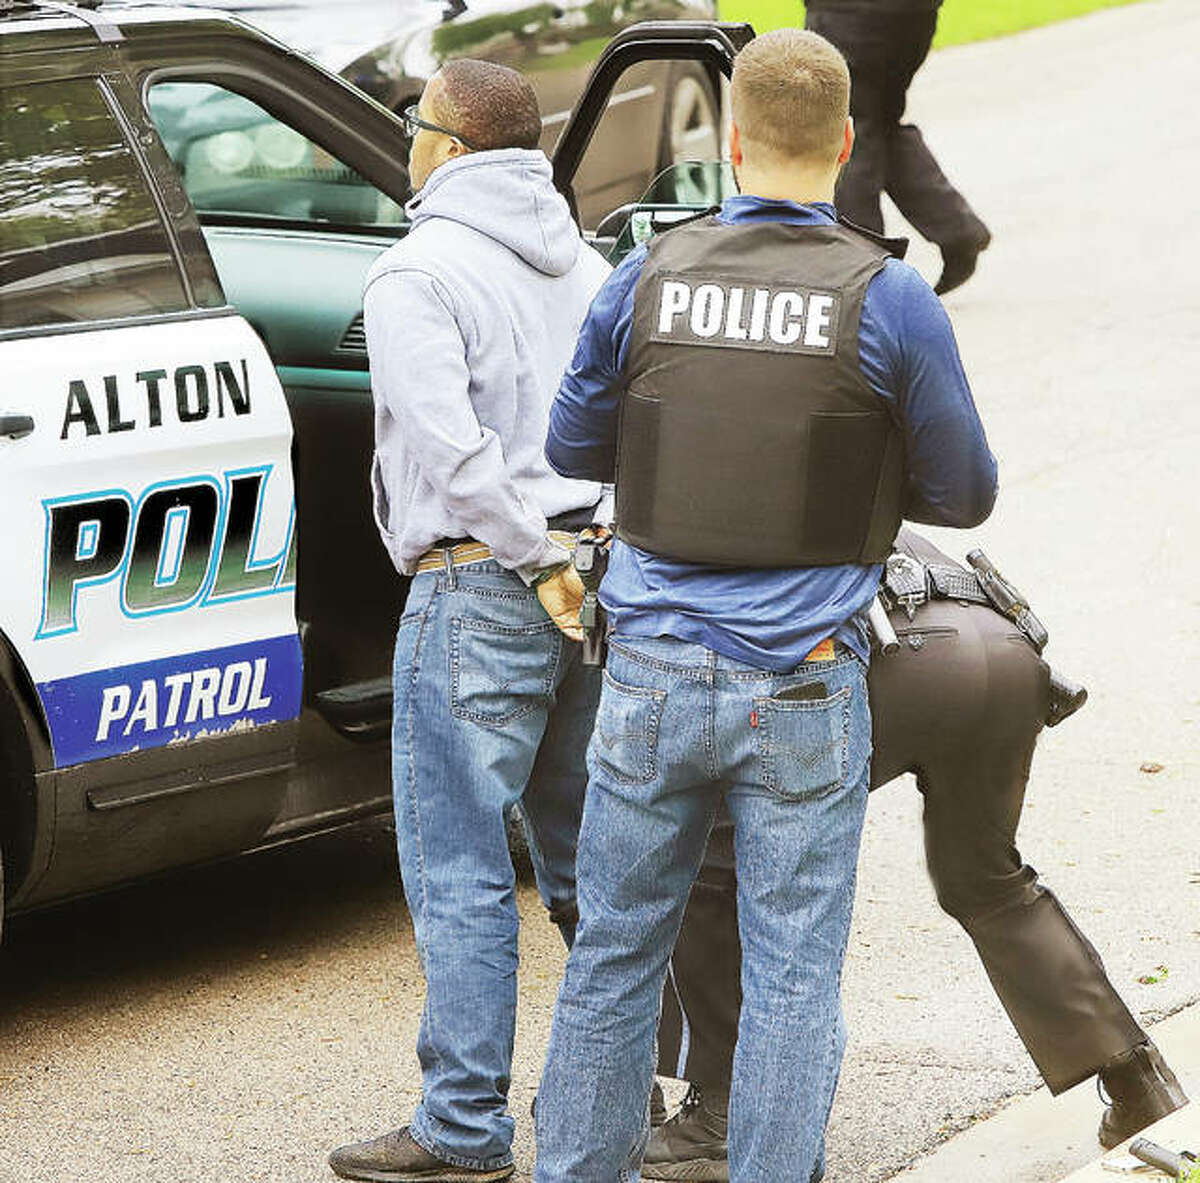 Telegraph A man who was in the backyard where the alleged suspect was found shot, was handcuffed, searched by police and promptly taken to the Alton Law Enforcement Center. A loaded semi-automatic hand gun was also recovered from the same back yard.